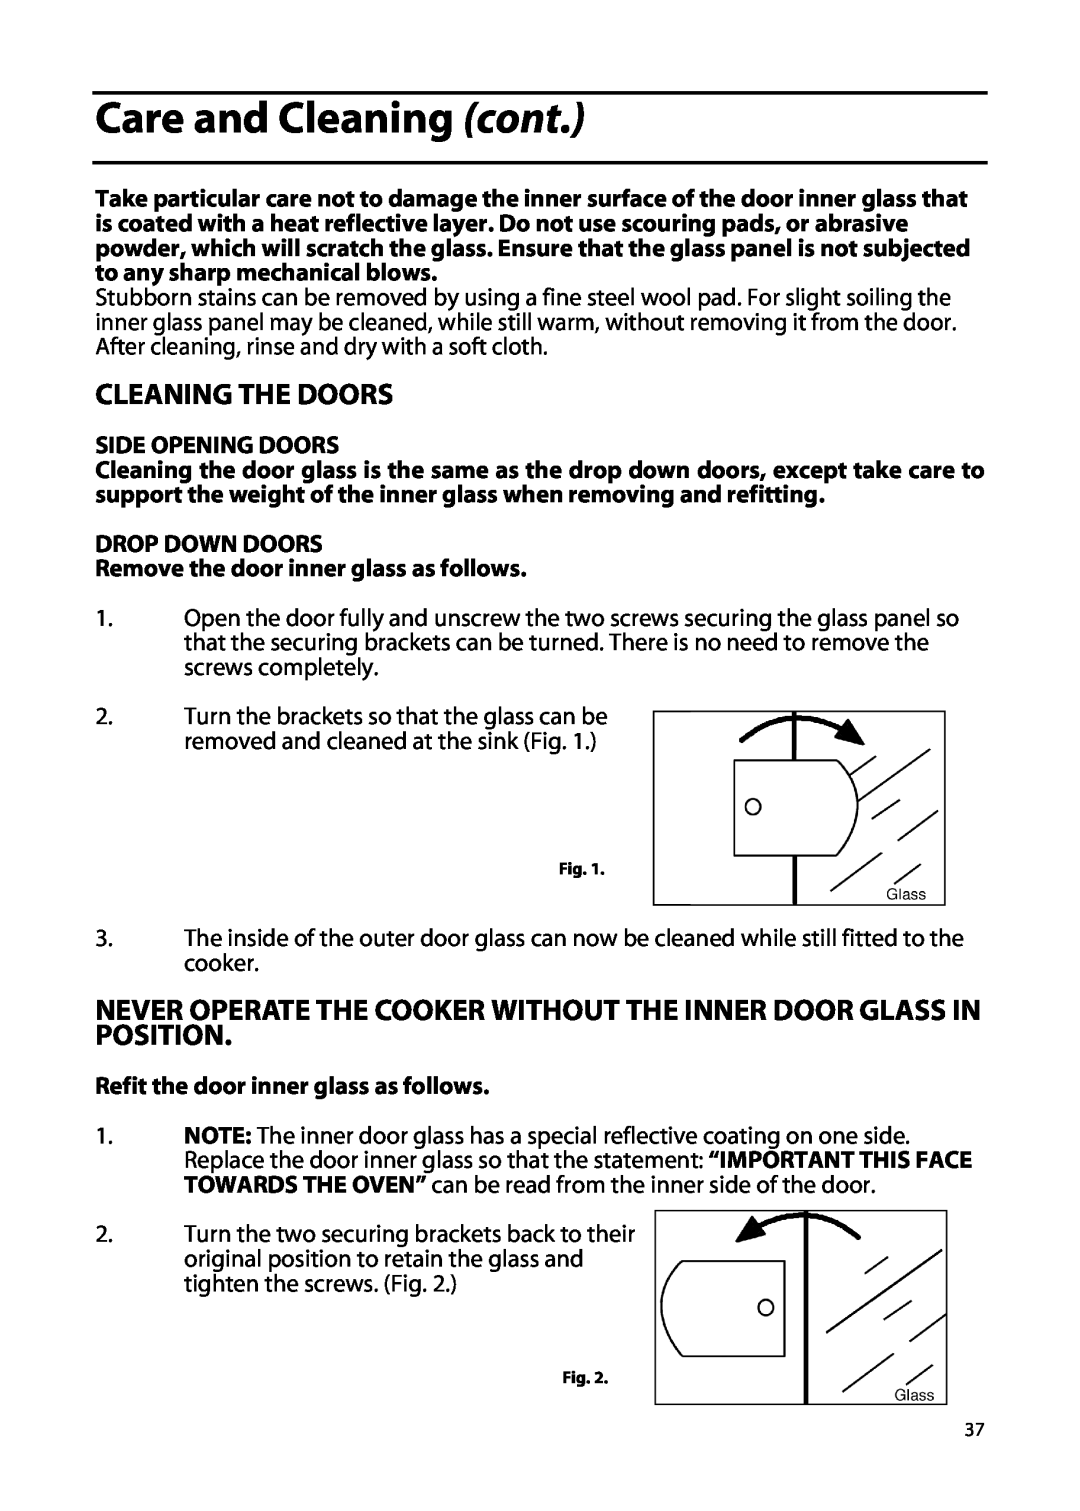 Hotpoint EW92, EW63, EW82, EW85, EW72 Cleaning The Doors, Never Operate The Cooker Without The Inner Door Glass In Position 